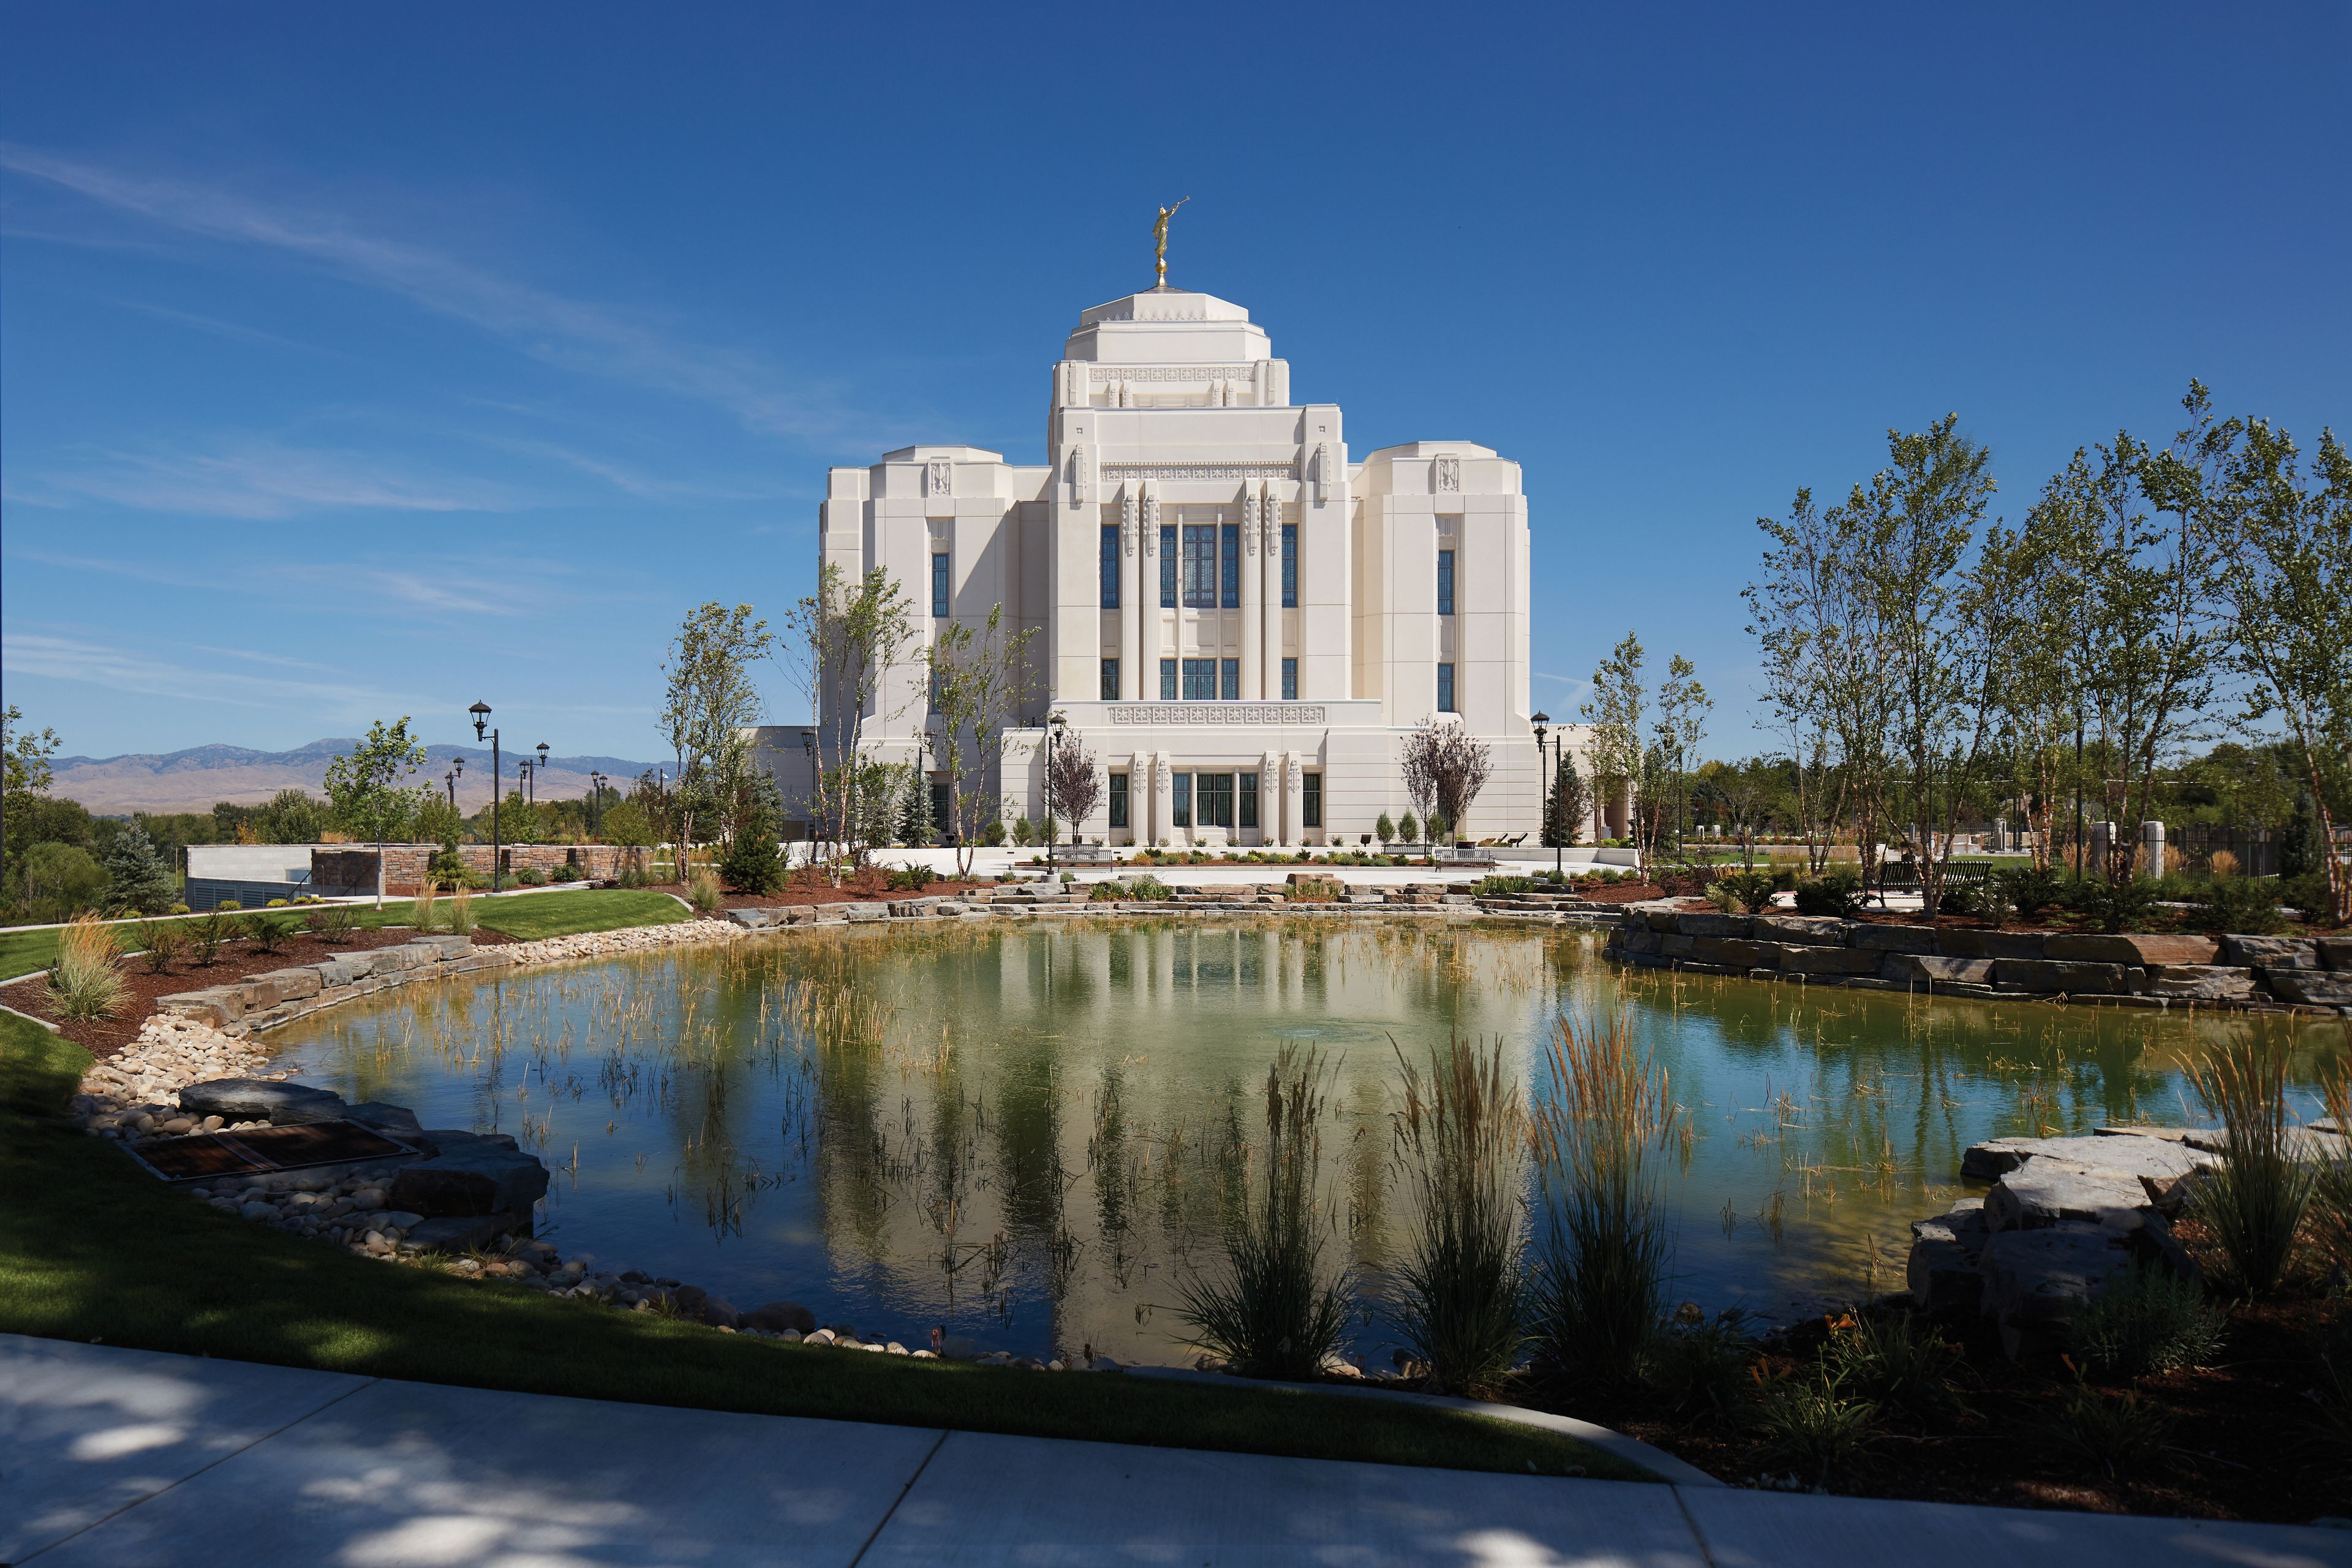 A photograph of the Meridian Idaho Temple overlooking a pond.